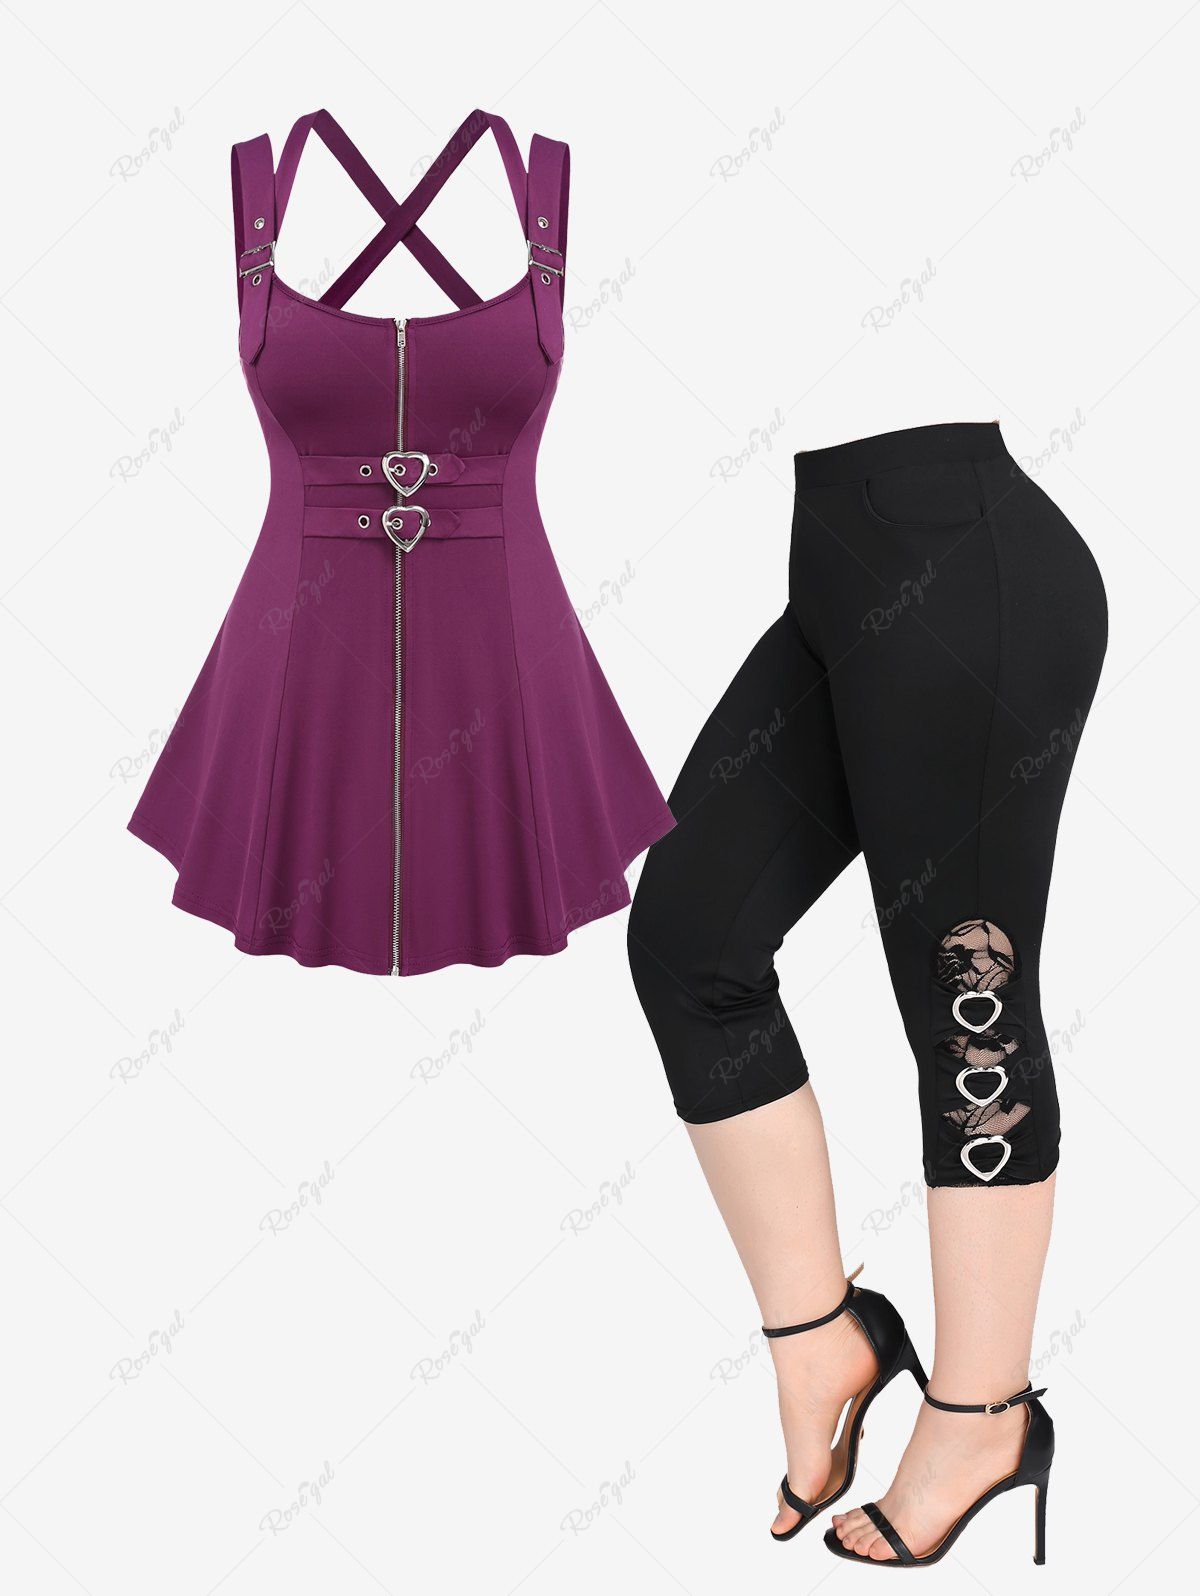 Unique Heart Buckle Grommet Full Zipper Crisscross Strappy Tank Top and Lace Panel Cropped Leggings Plus Size Outfits  